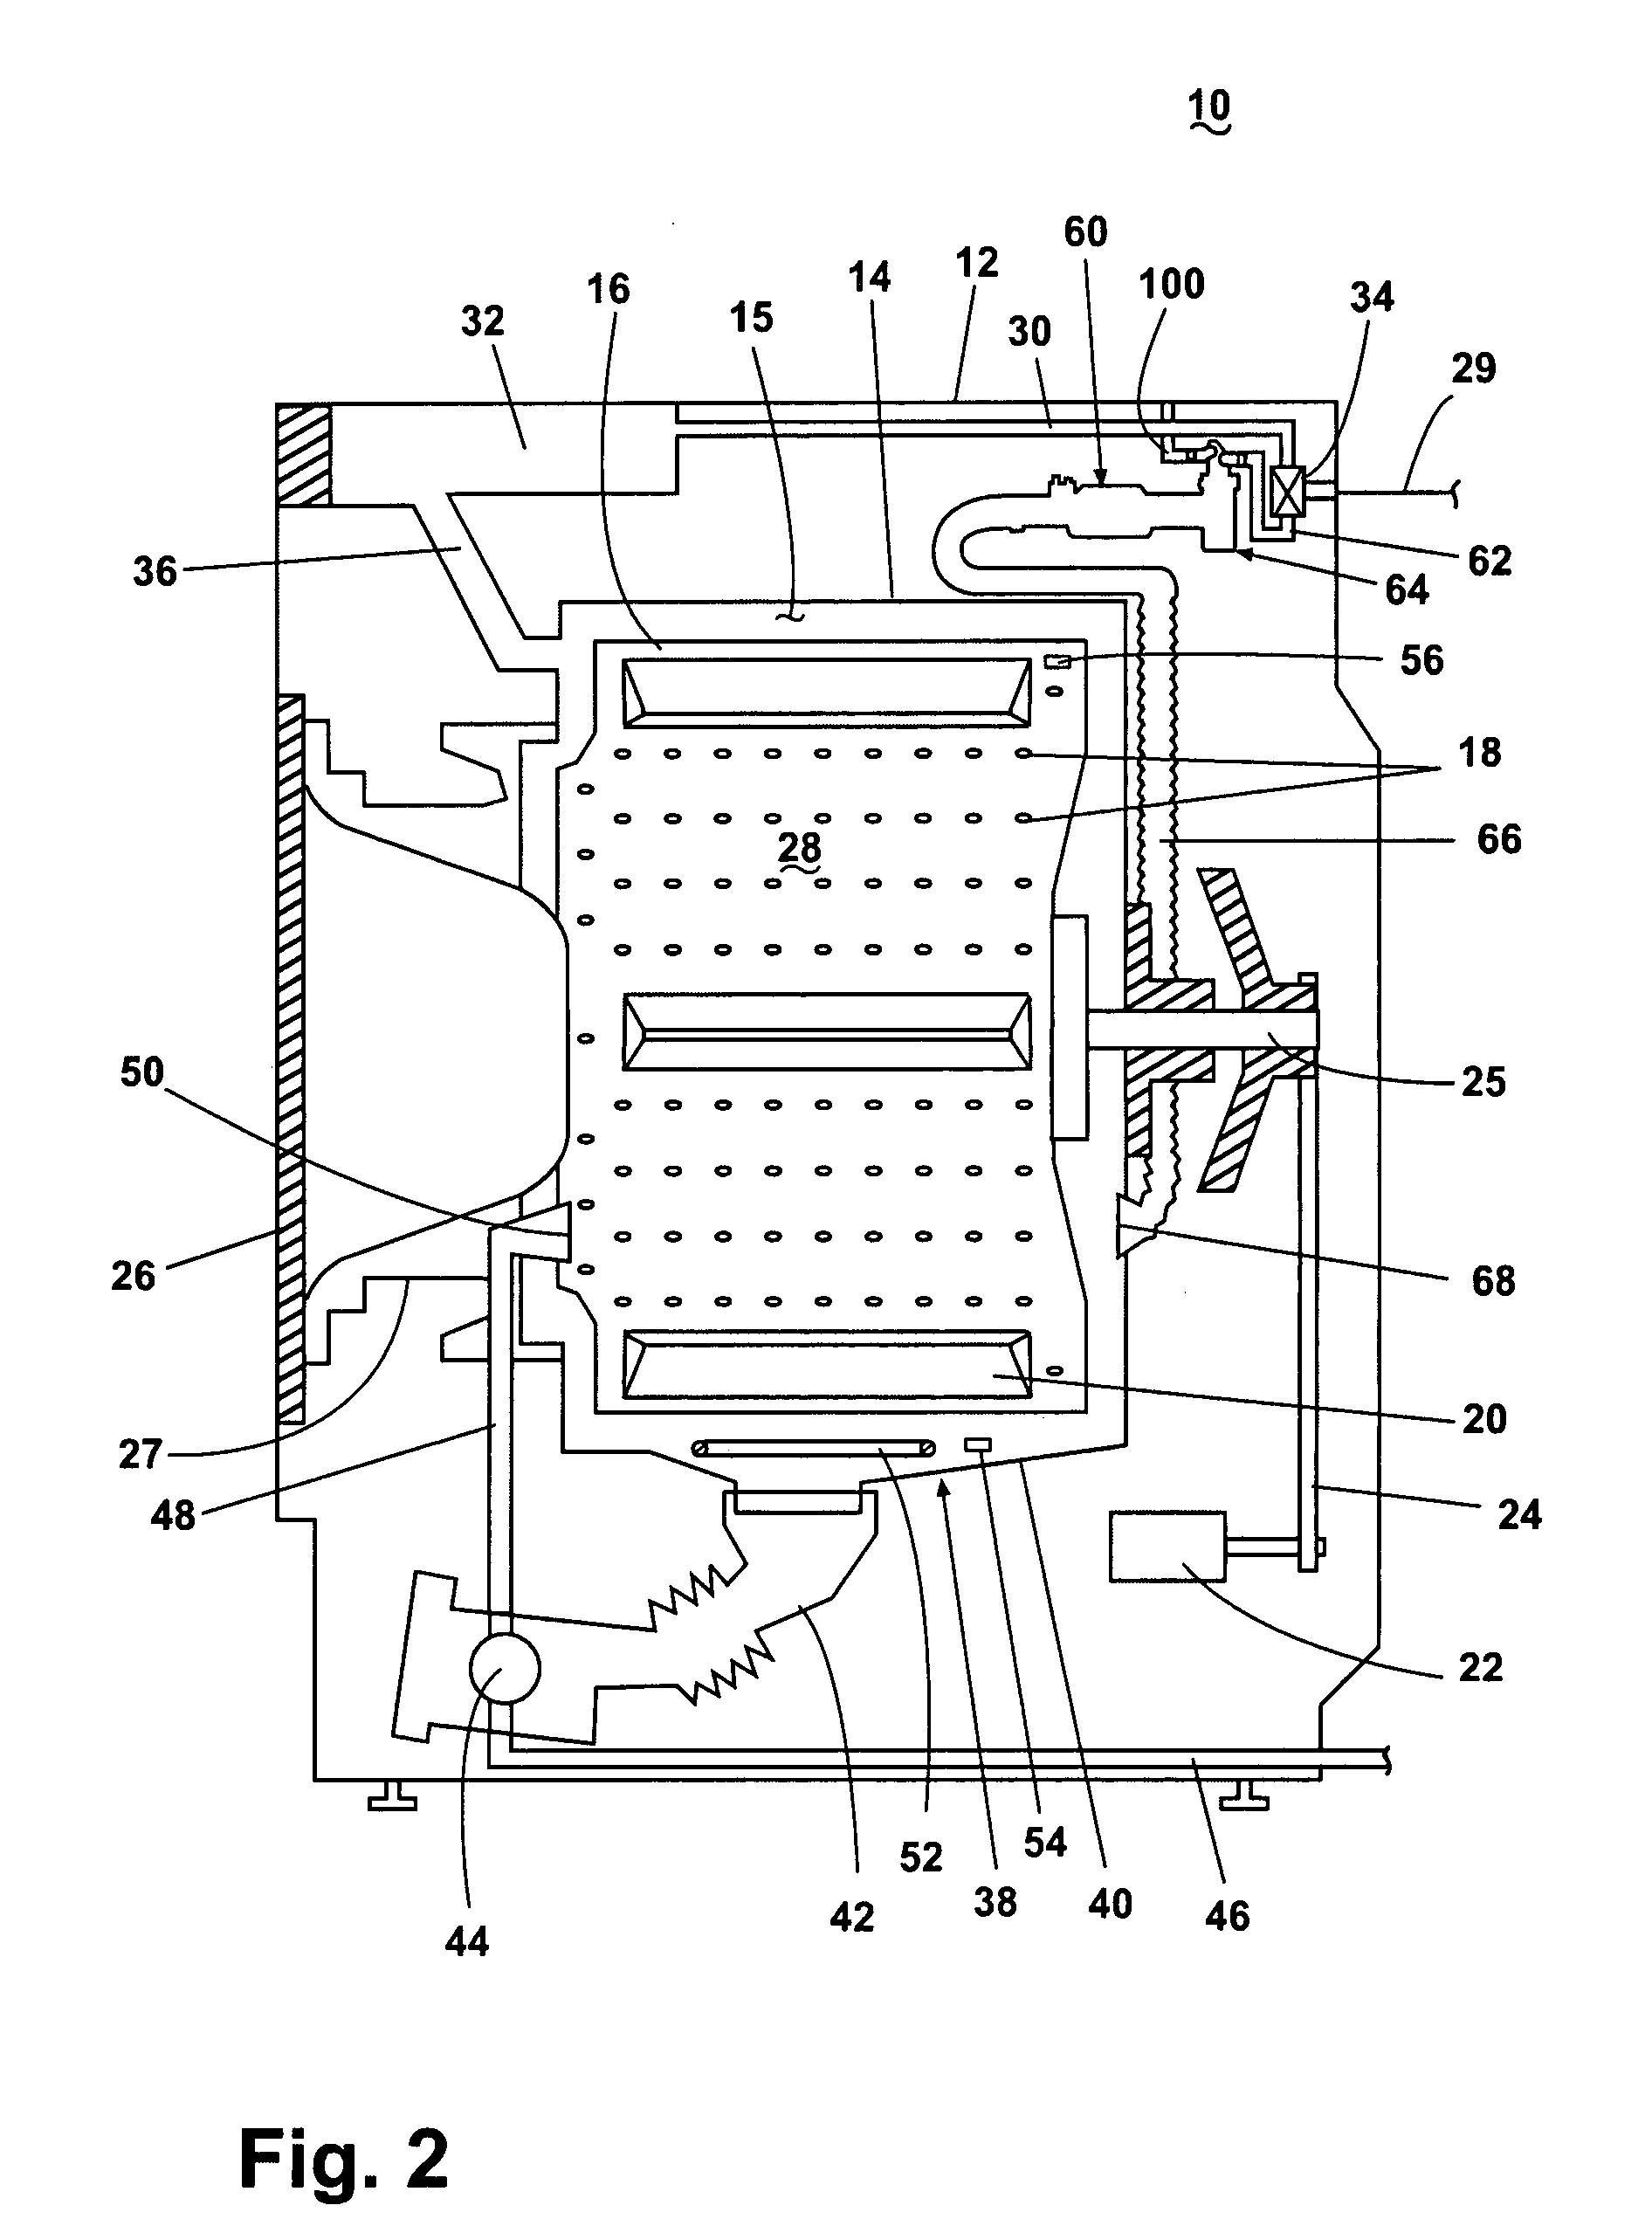 Method for Detecting Abnormality in a Fabric Treatment Appliance Having a Steam Generator